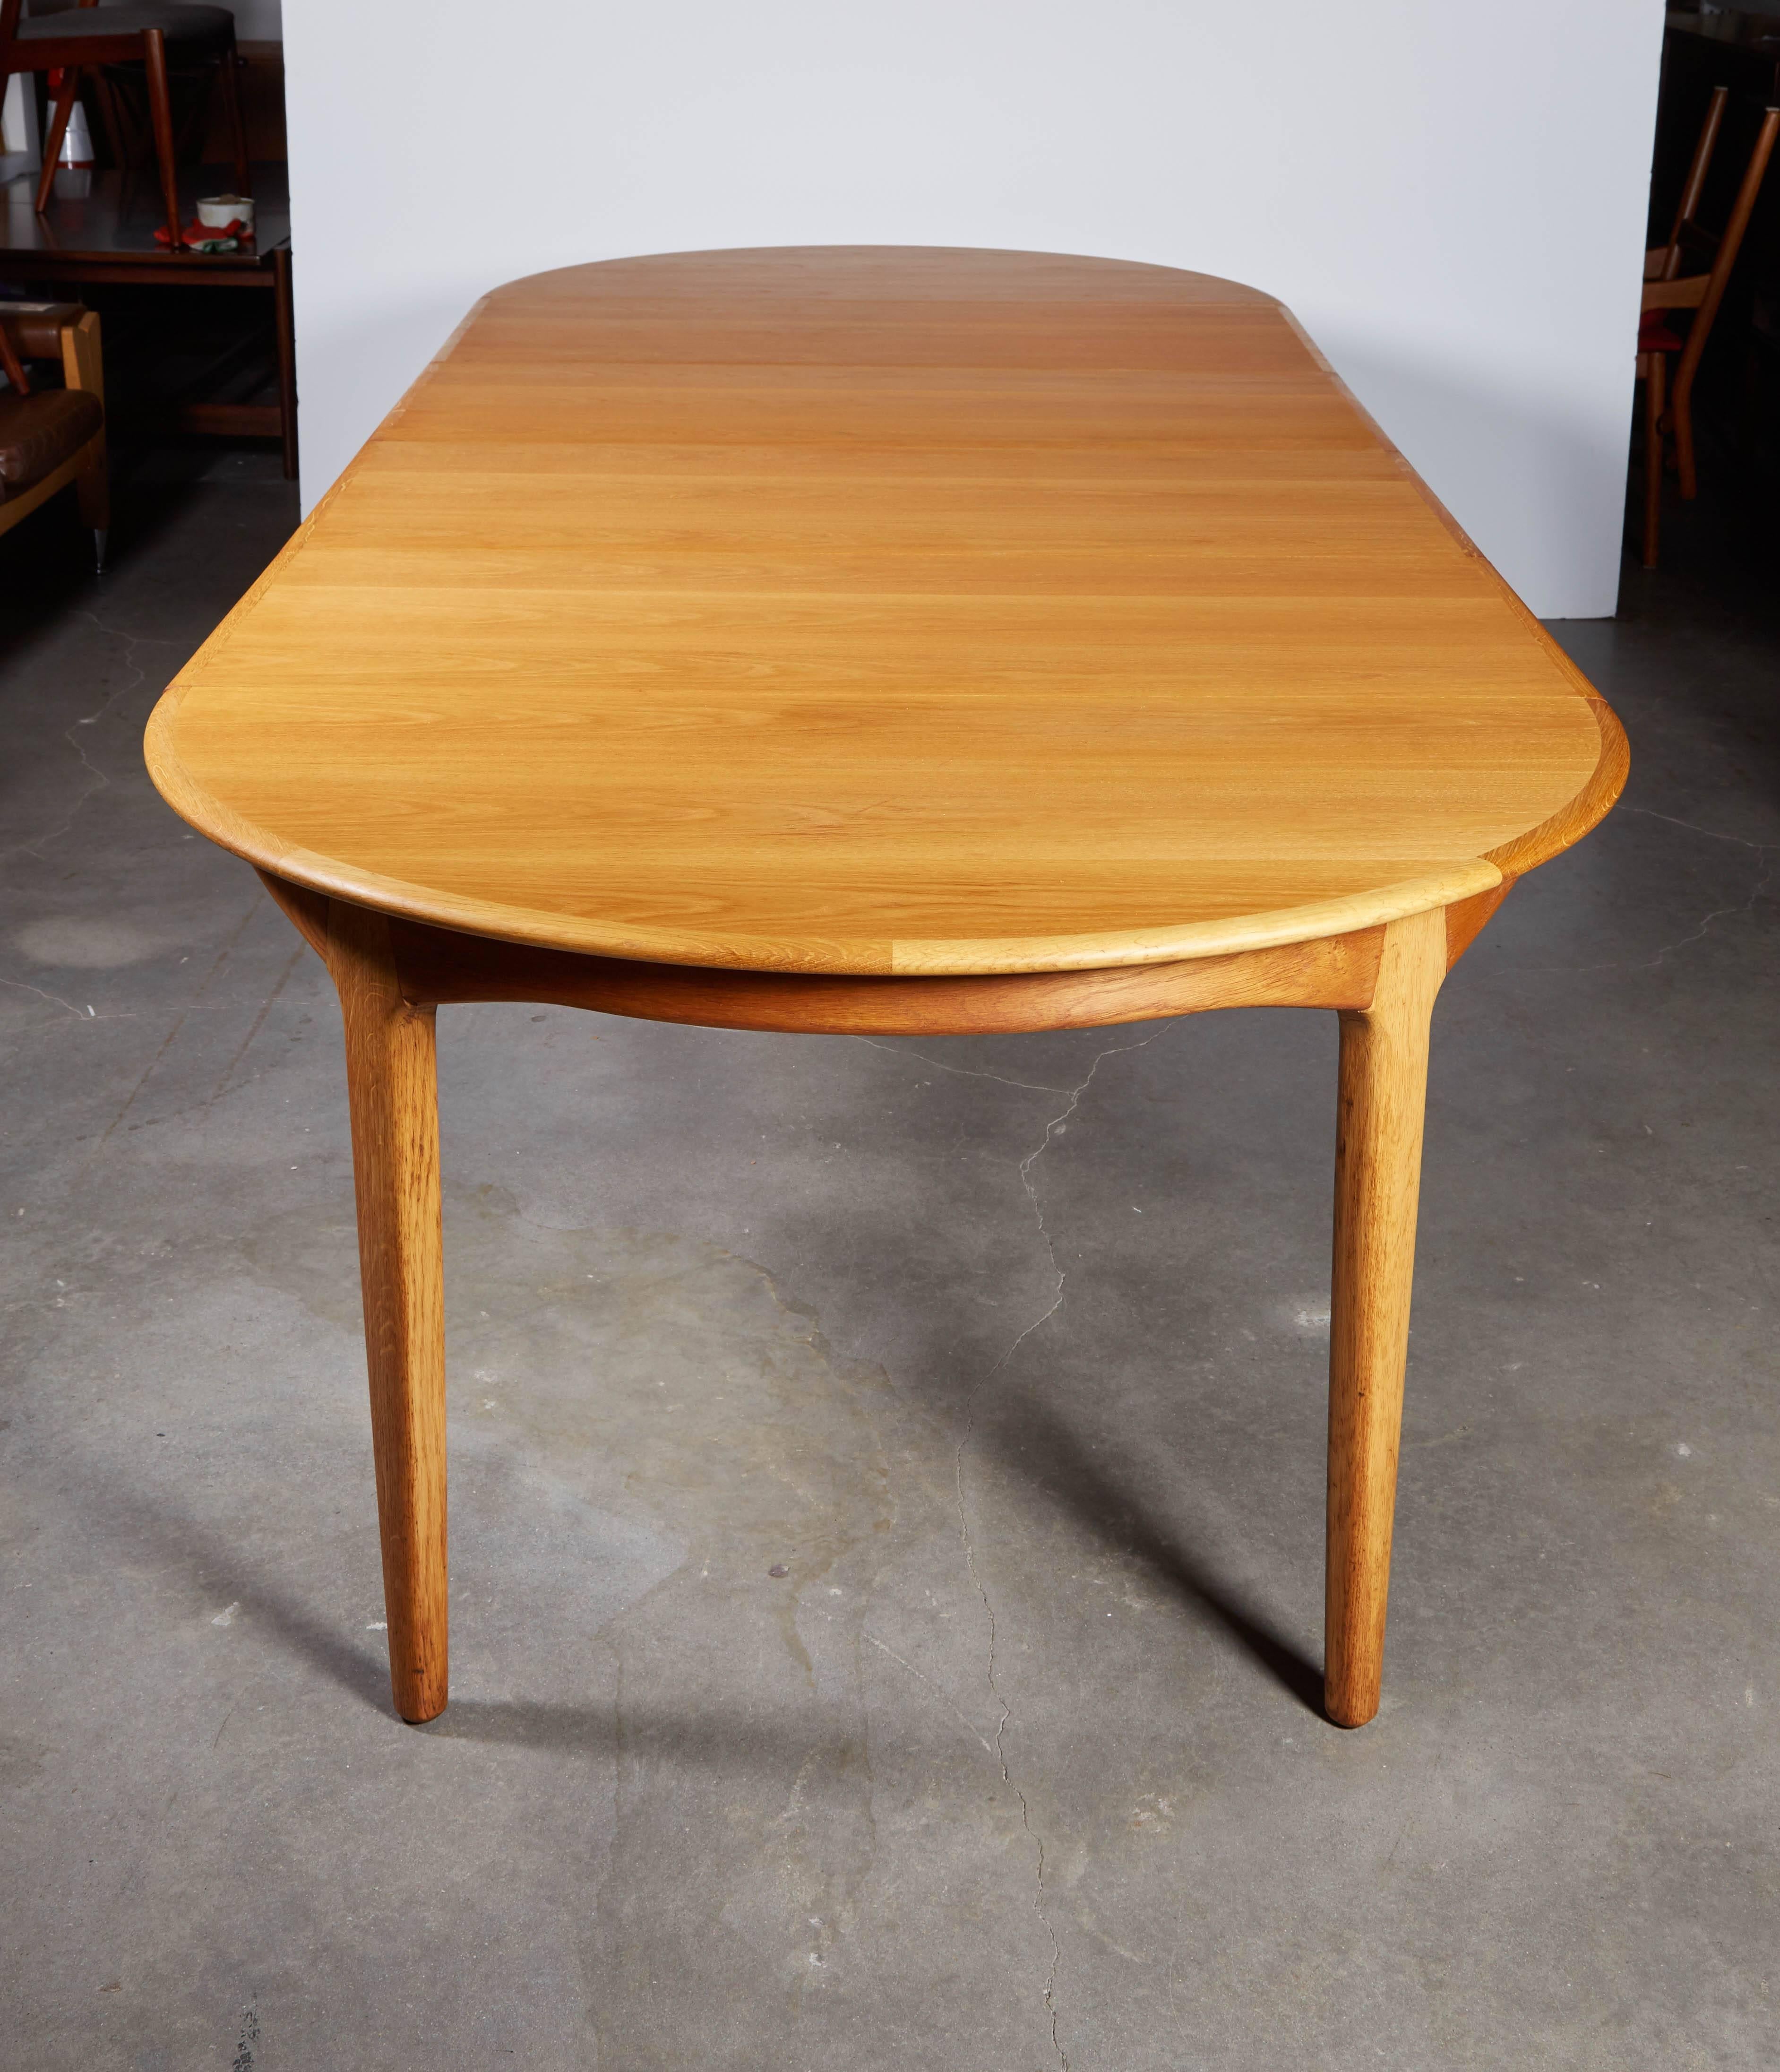 Vintage 1950s Round Dining Table by Henning Kjaernulf

This mid century round dining table is in excellent condition and has four 20